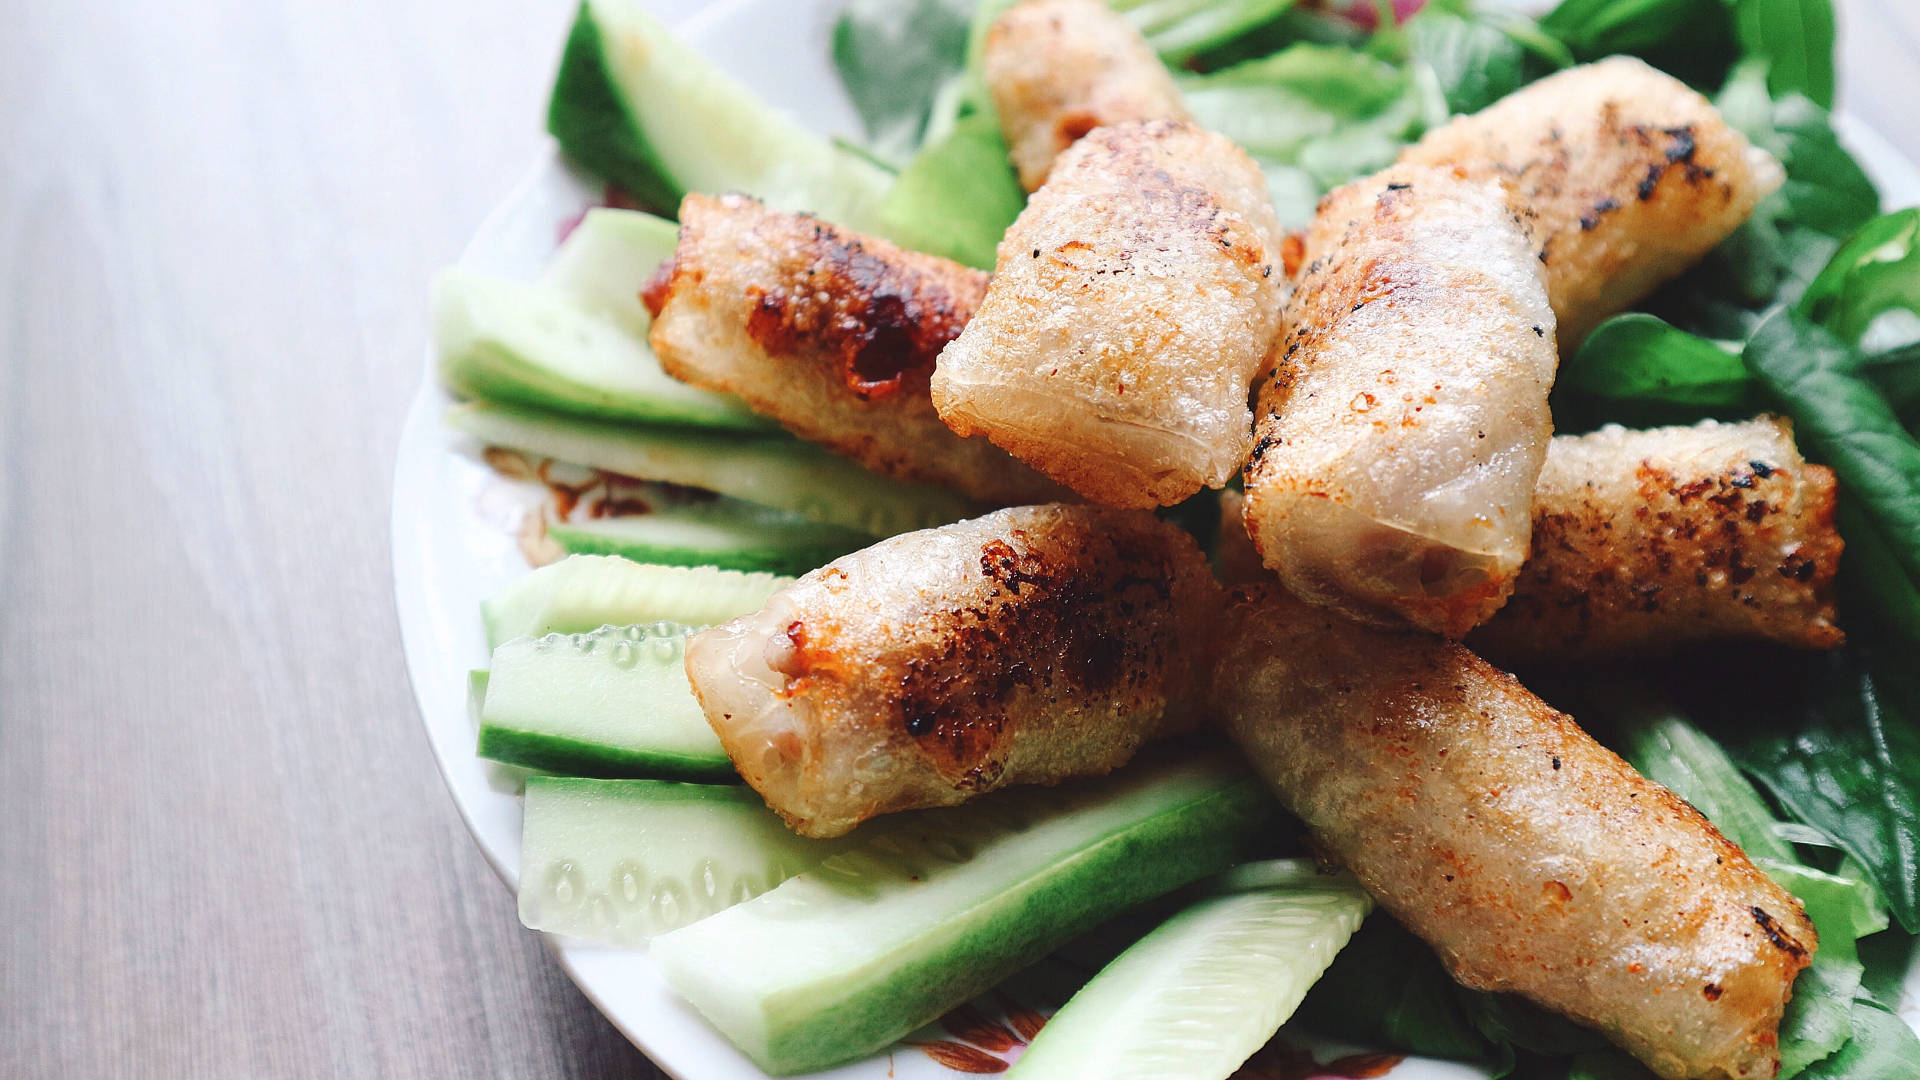 Freshly Made Egg Rolls Stacked On Sliced Cucumbers